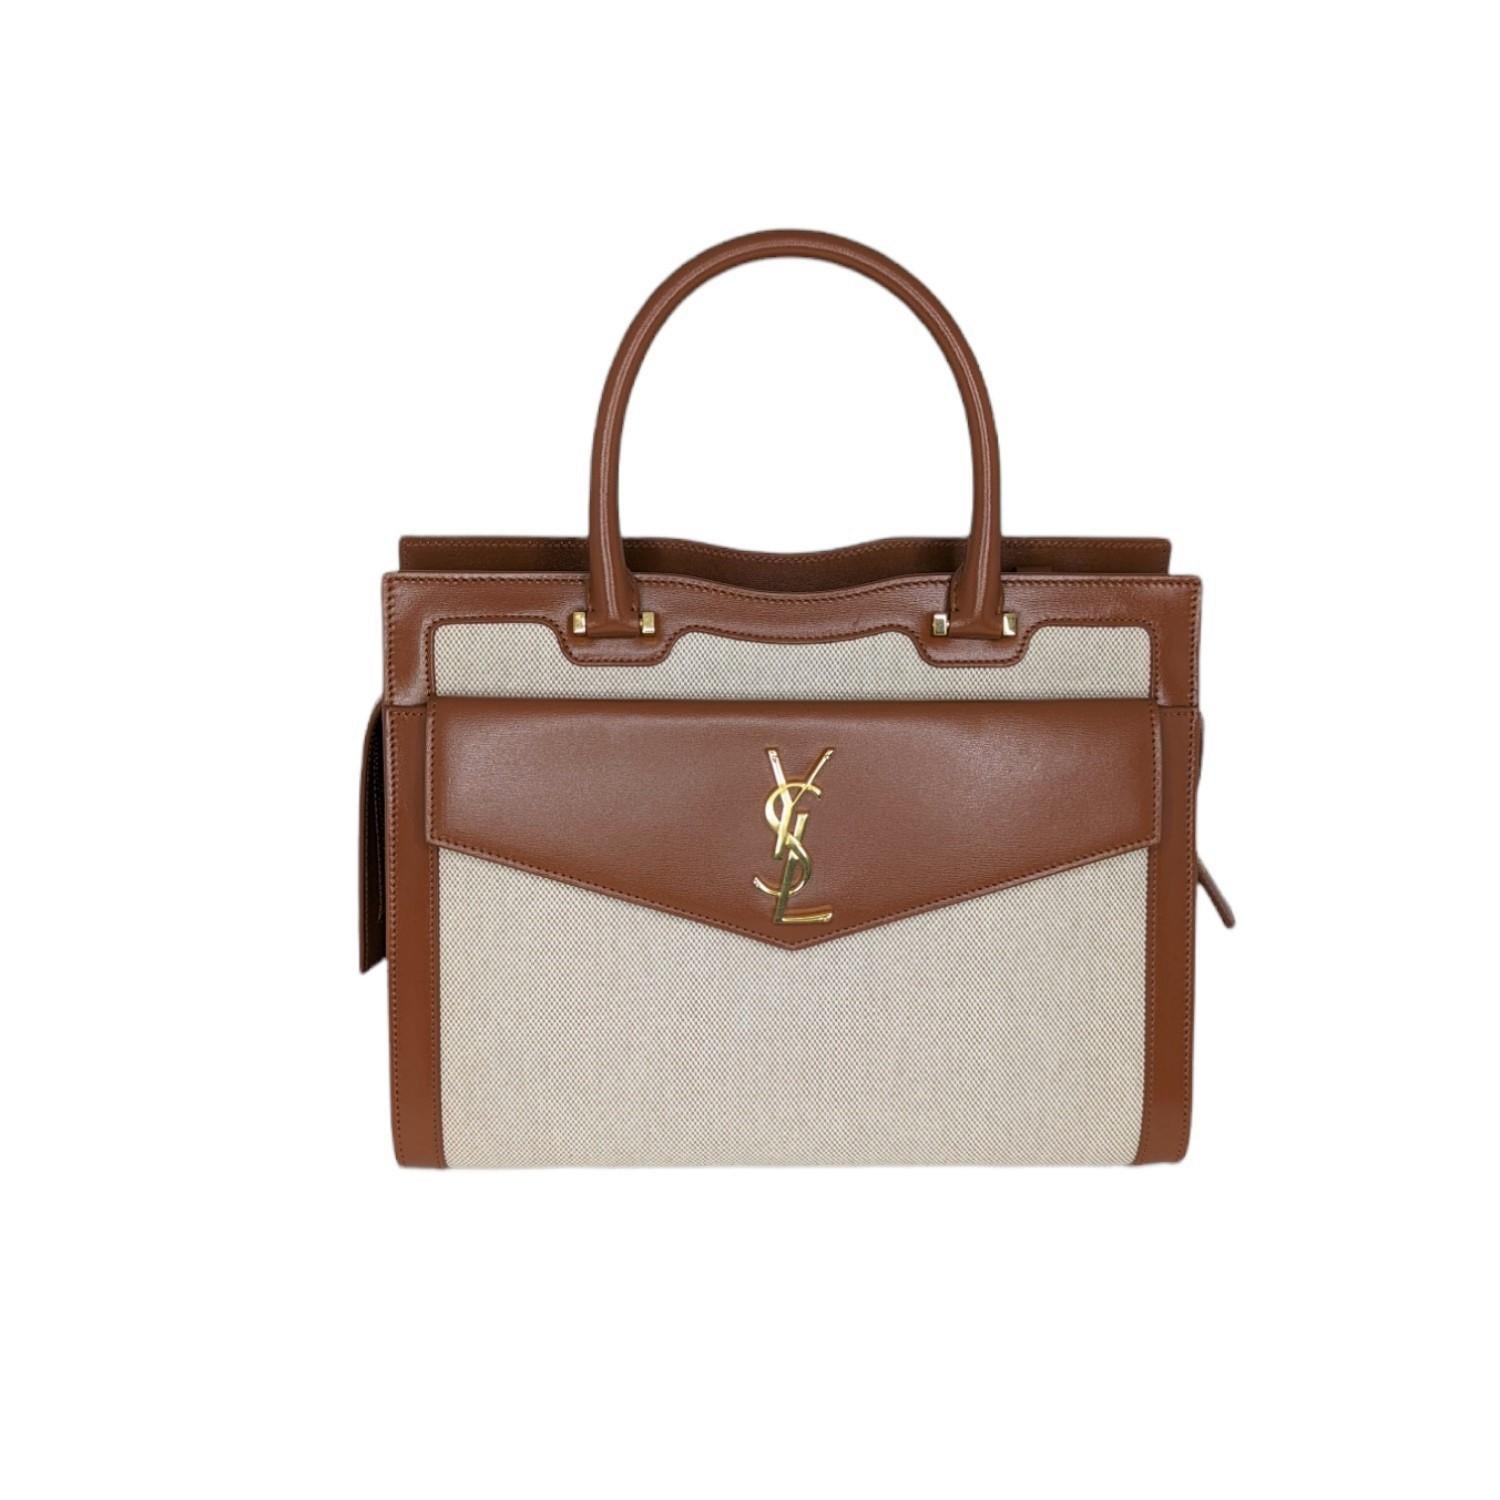 Saint Laurent YSL Medium Uptown Bag in Toile Canvas

Saint Laurent manifests structured elegance in this Uptown Medium tote. Crafted in Italy from cotton canvas with leather trim and luminous golden hardware, this bag features a coordinating clutch